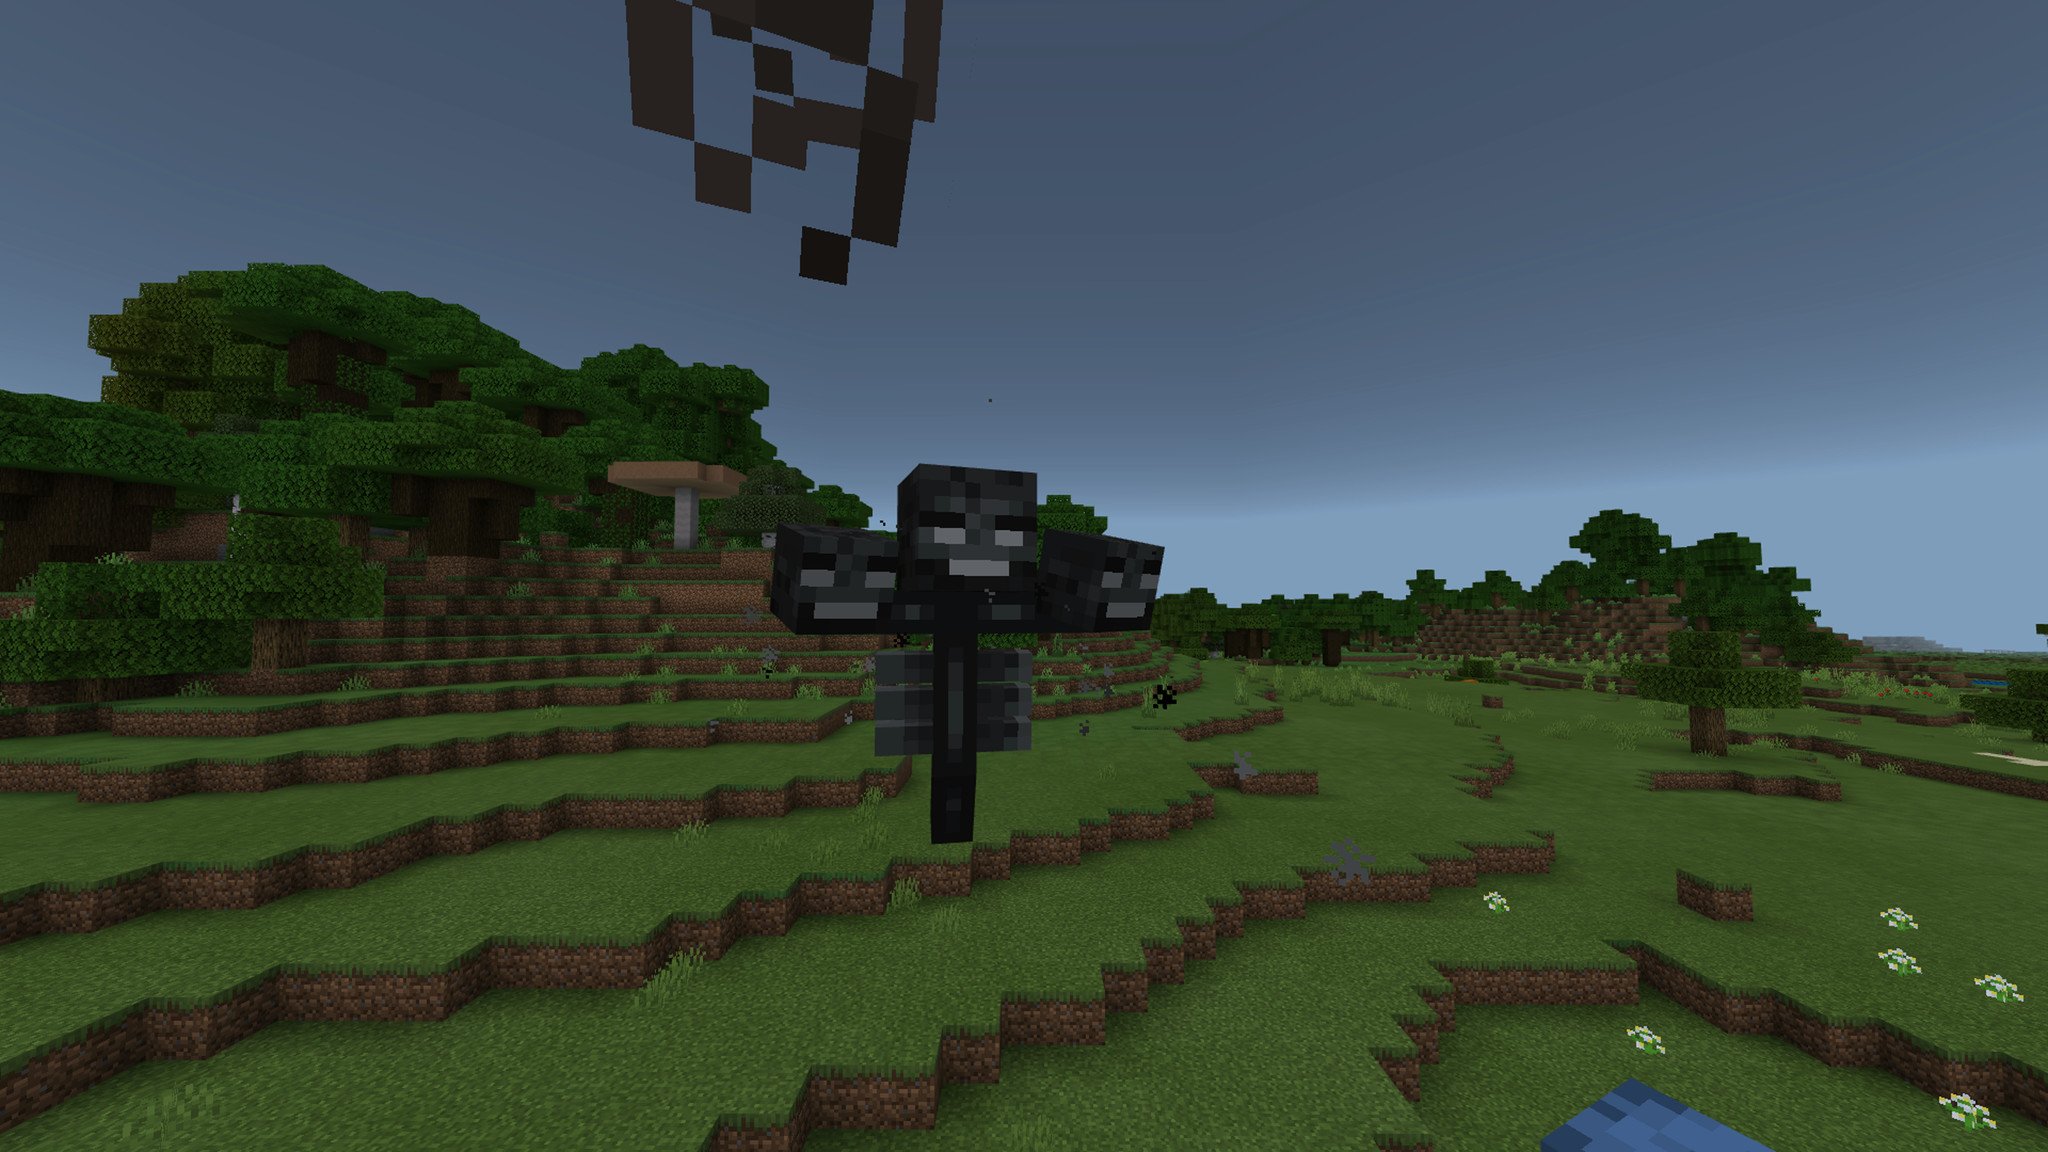 Wither-y boi